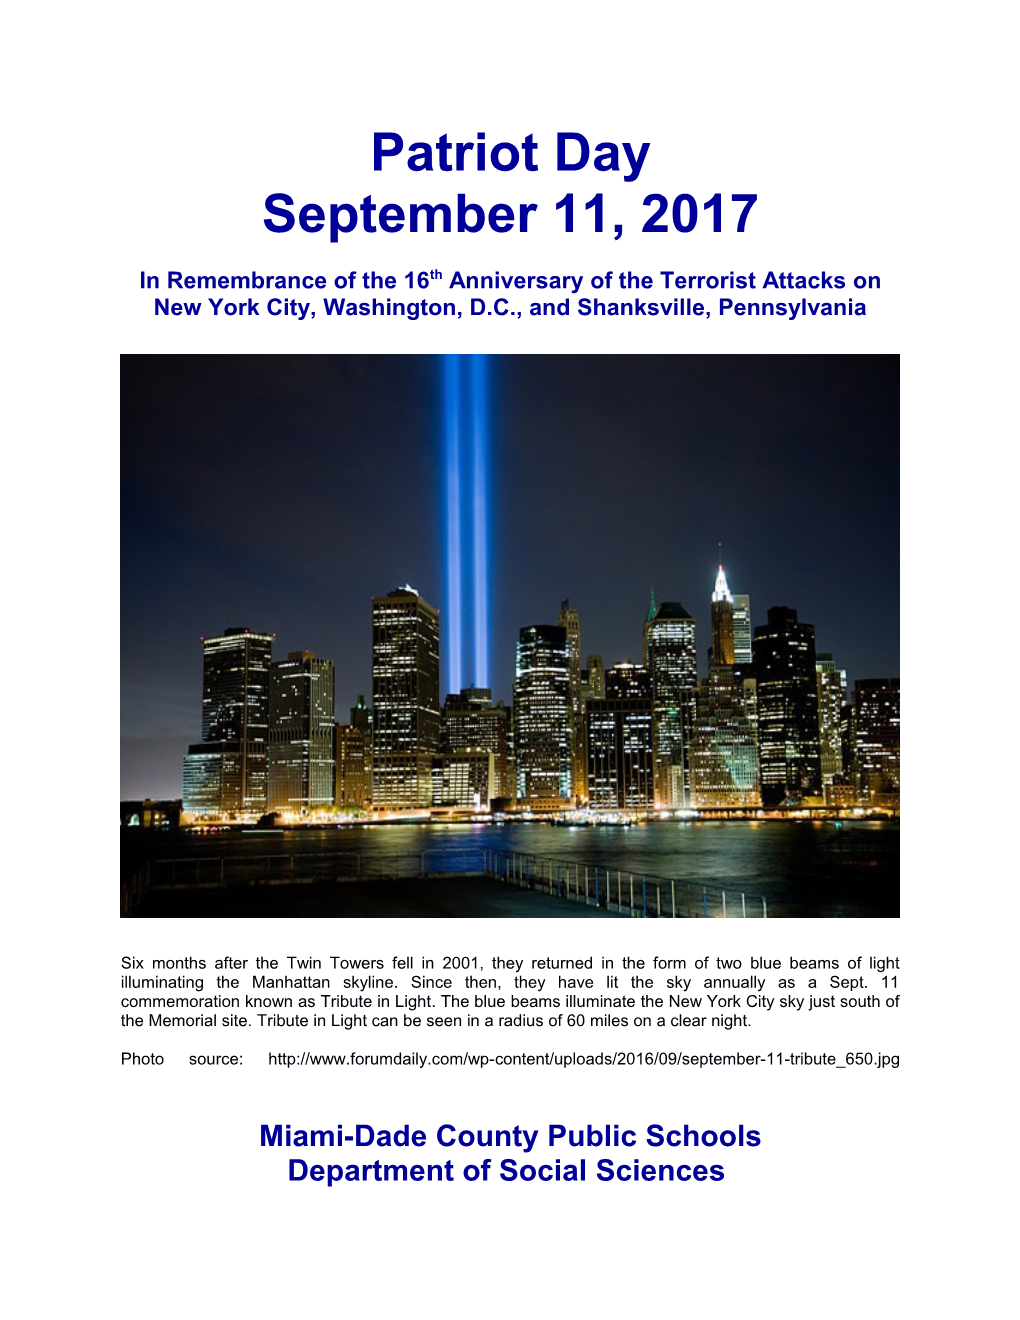 In Remembrance of the 16Thanniversary of the Terrorist Attacks on New York City, Washington